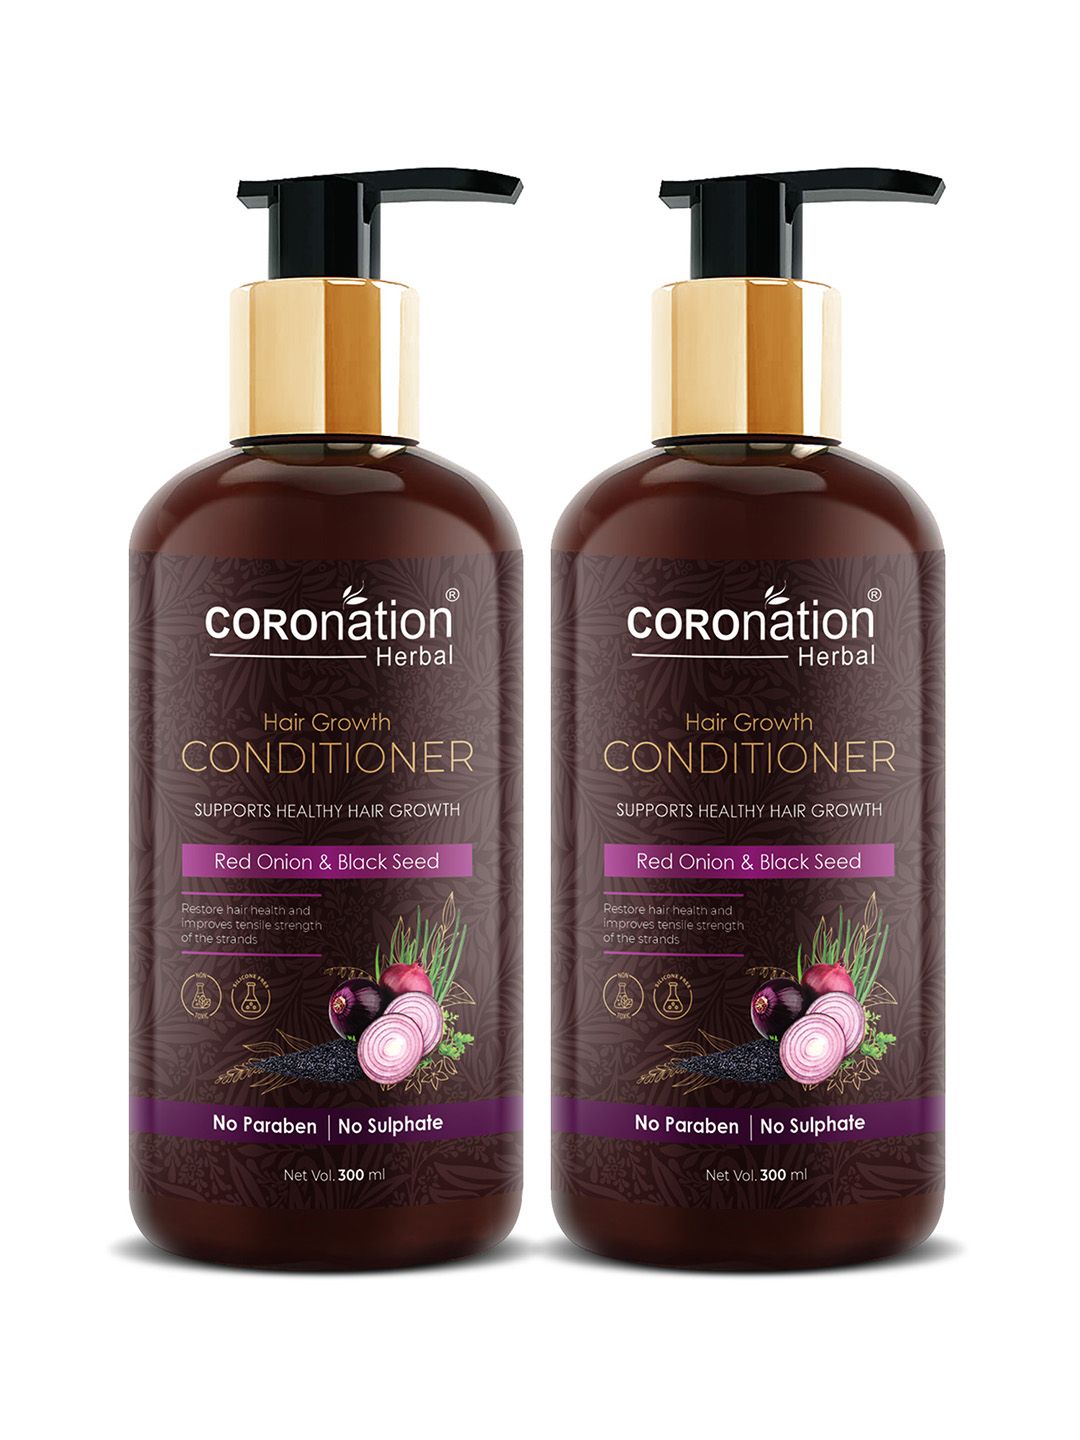 COROnation Herbal Set of 2 Hair Growth Conditioner with Red Onion-Black Seed Oil 600 ml Price in India